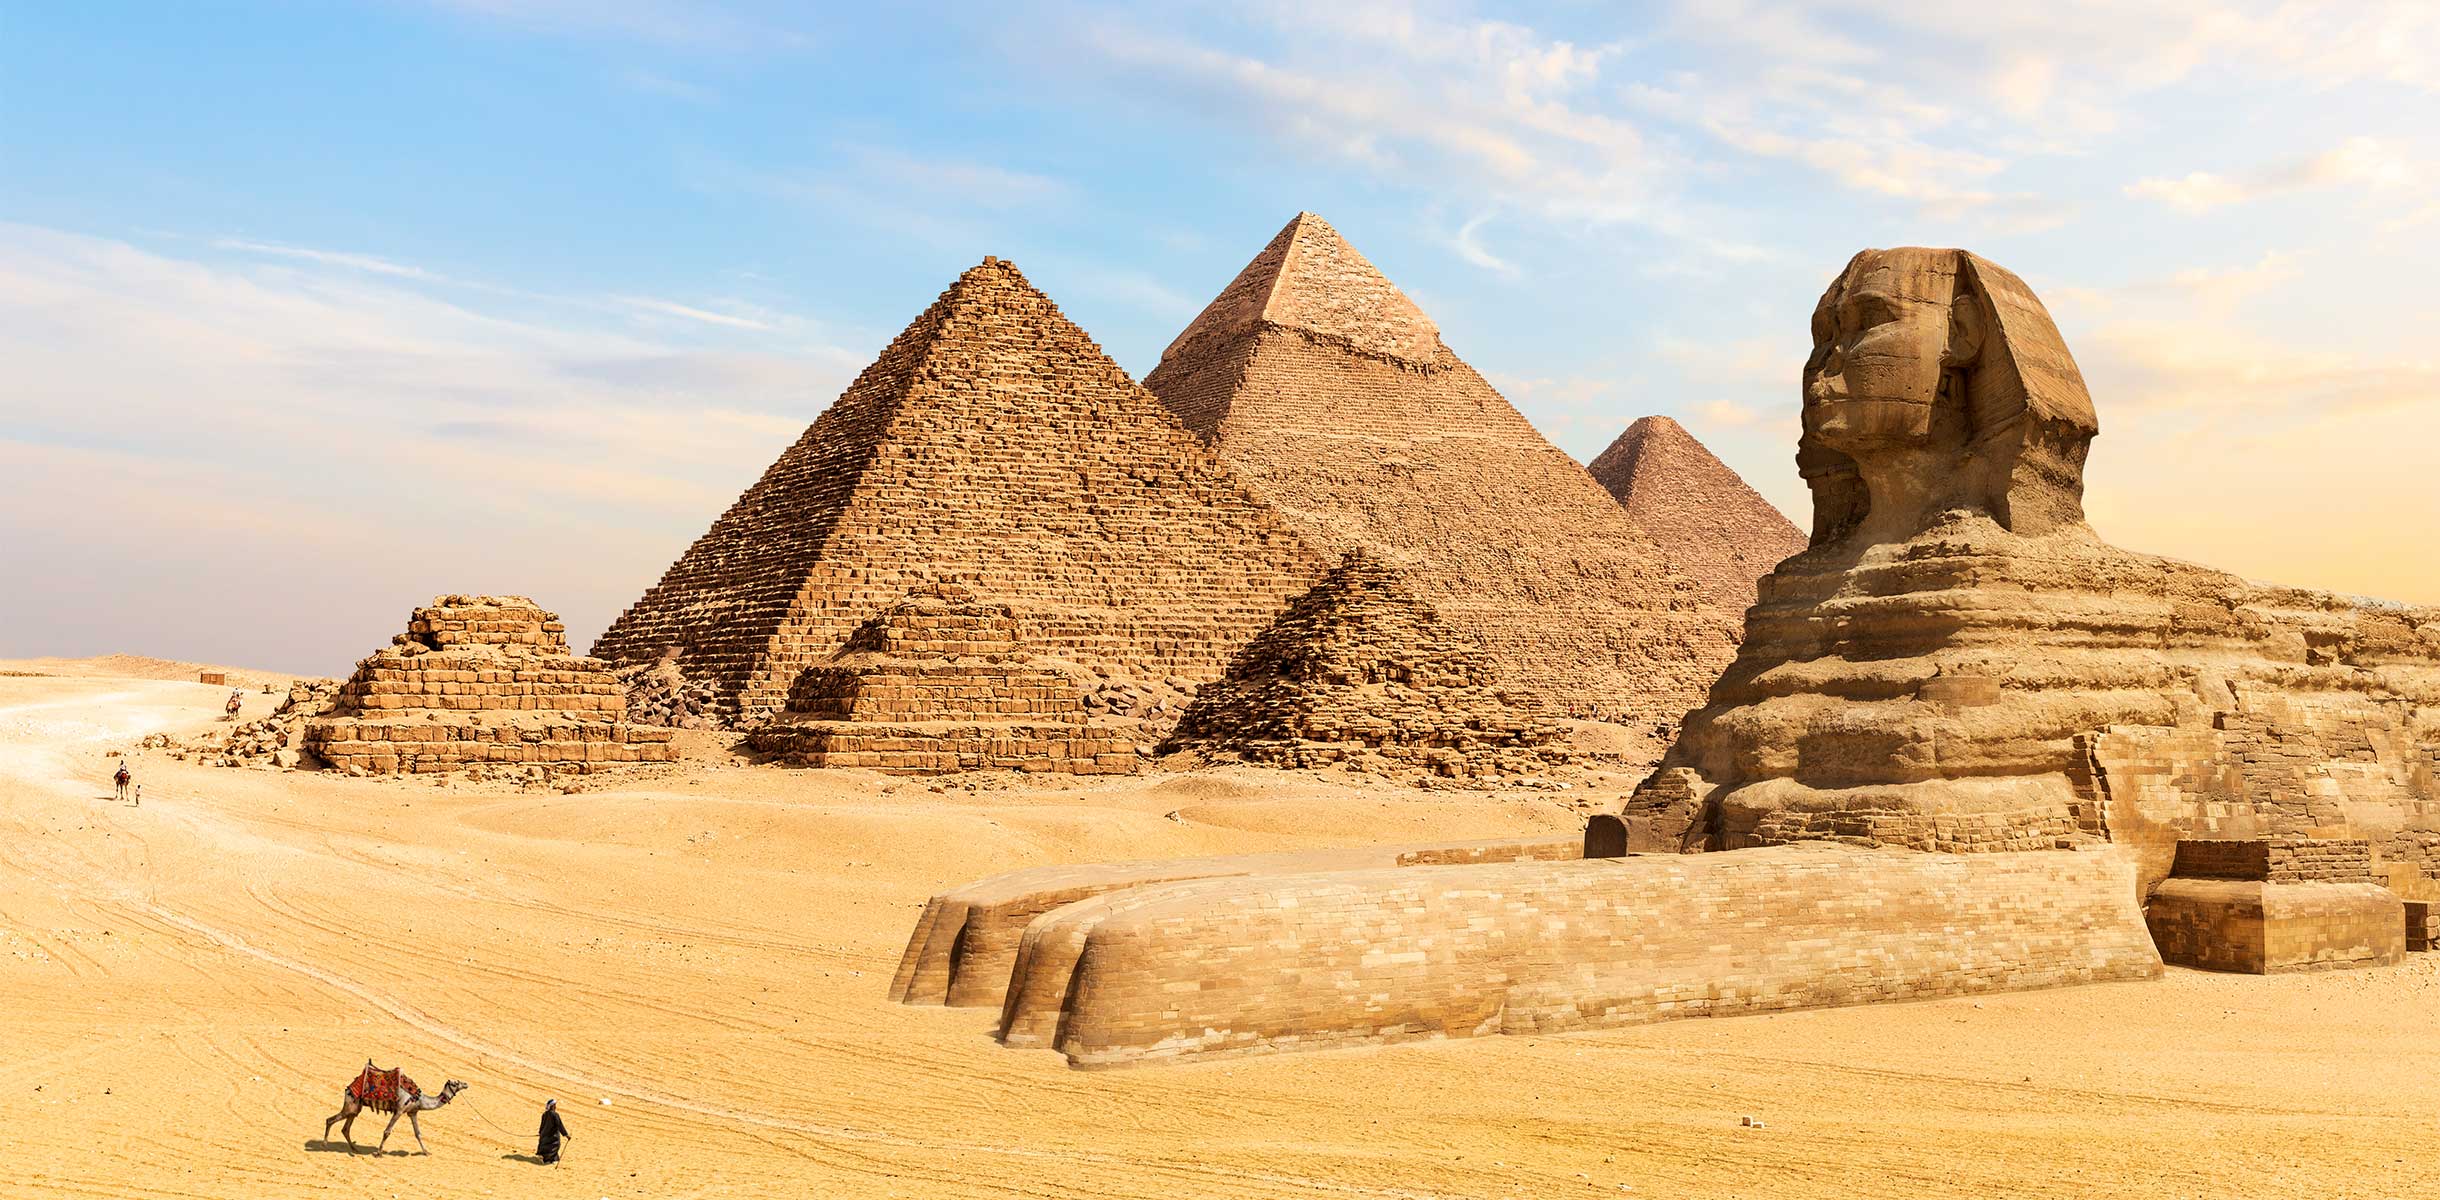 Enjoy a visit to the Pyramid of Giza on a cruise to the Mediterranean